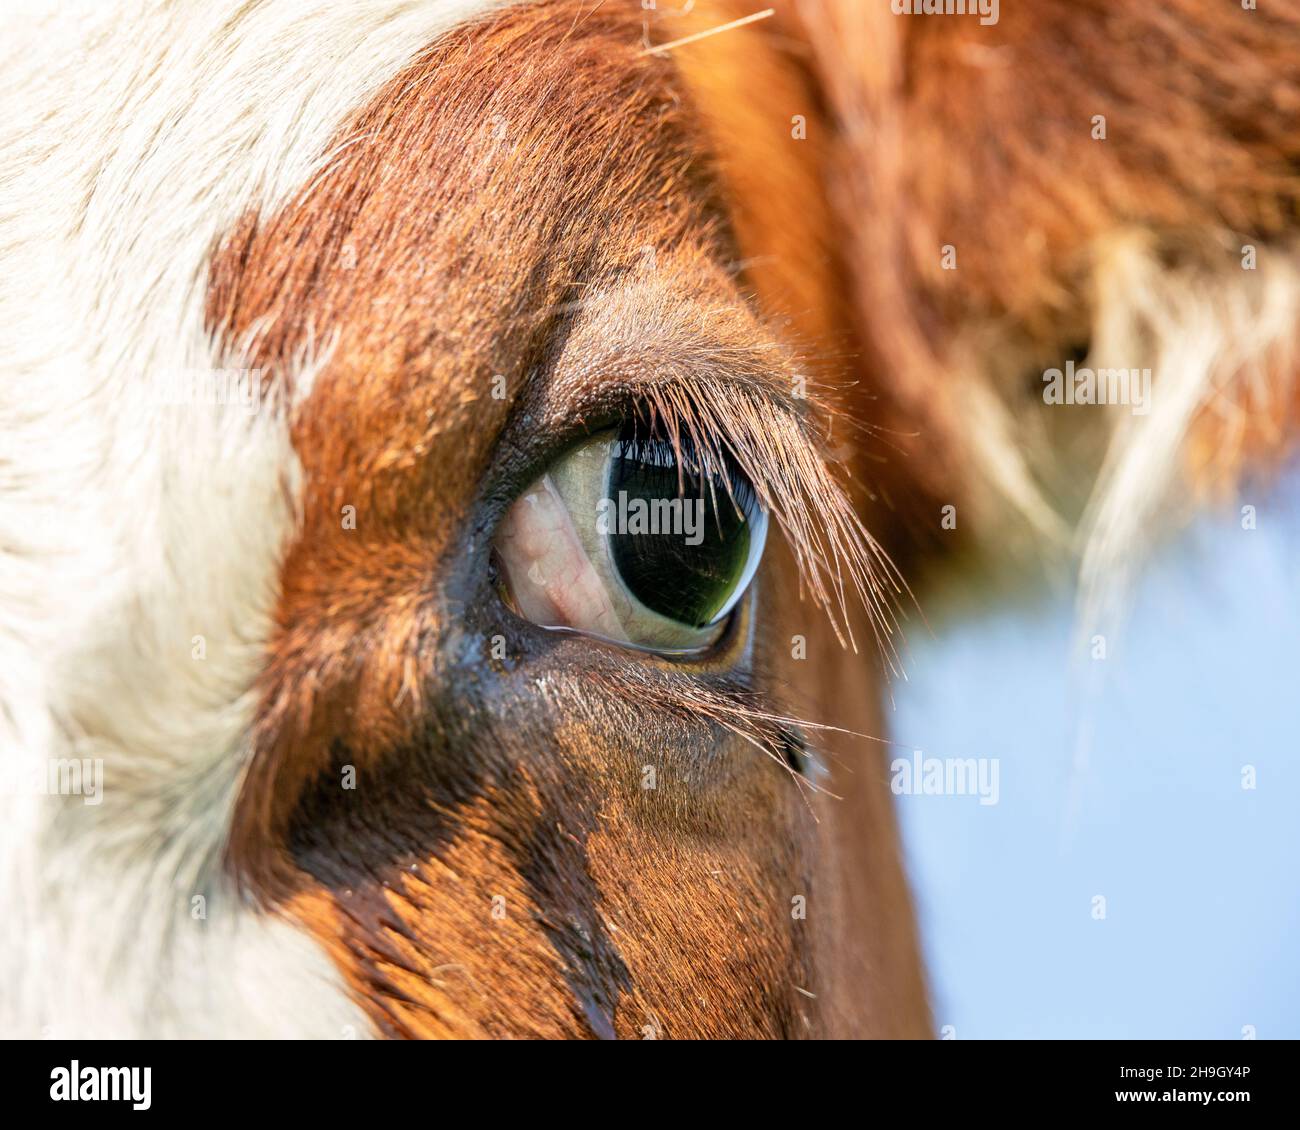 One eye cow, close-up of a dairy red and white coated, looking calm and happy Stock Photo